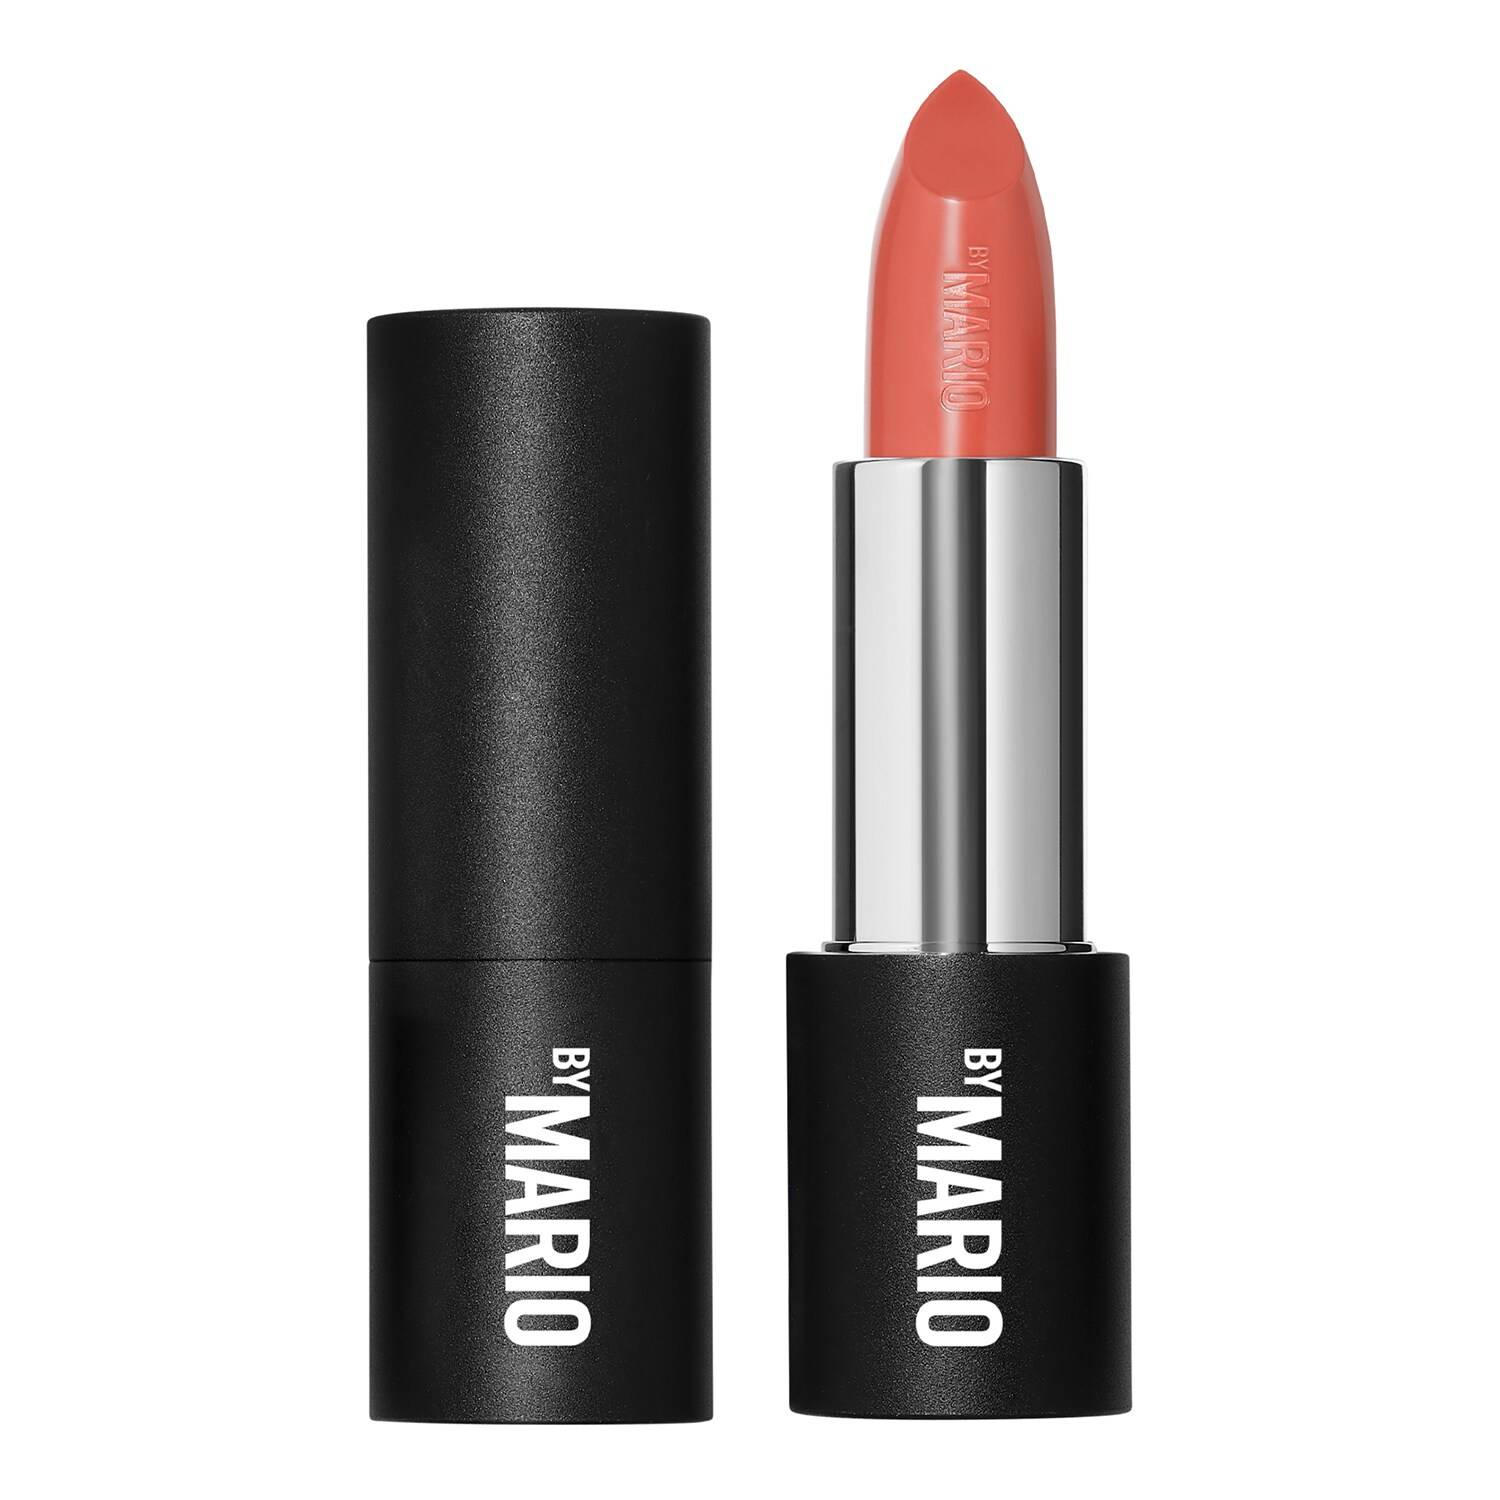 Makeup By Mario Supersatin Lipstick 3.5G Soho - Spiced Coral